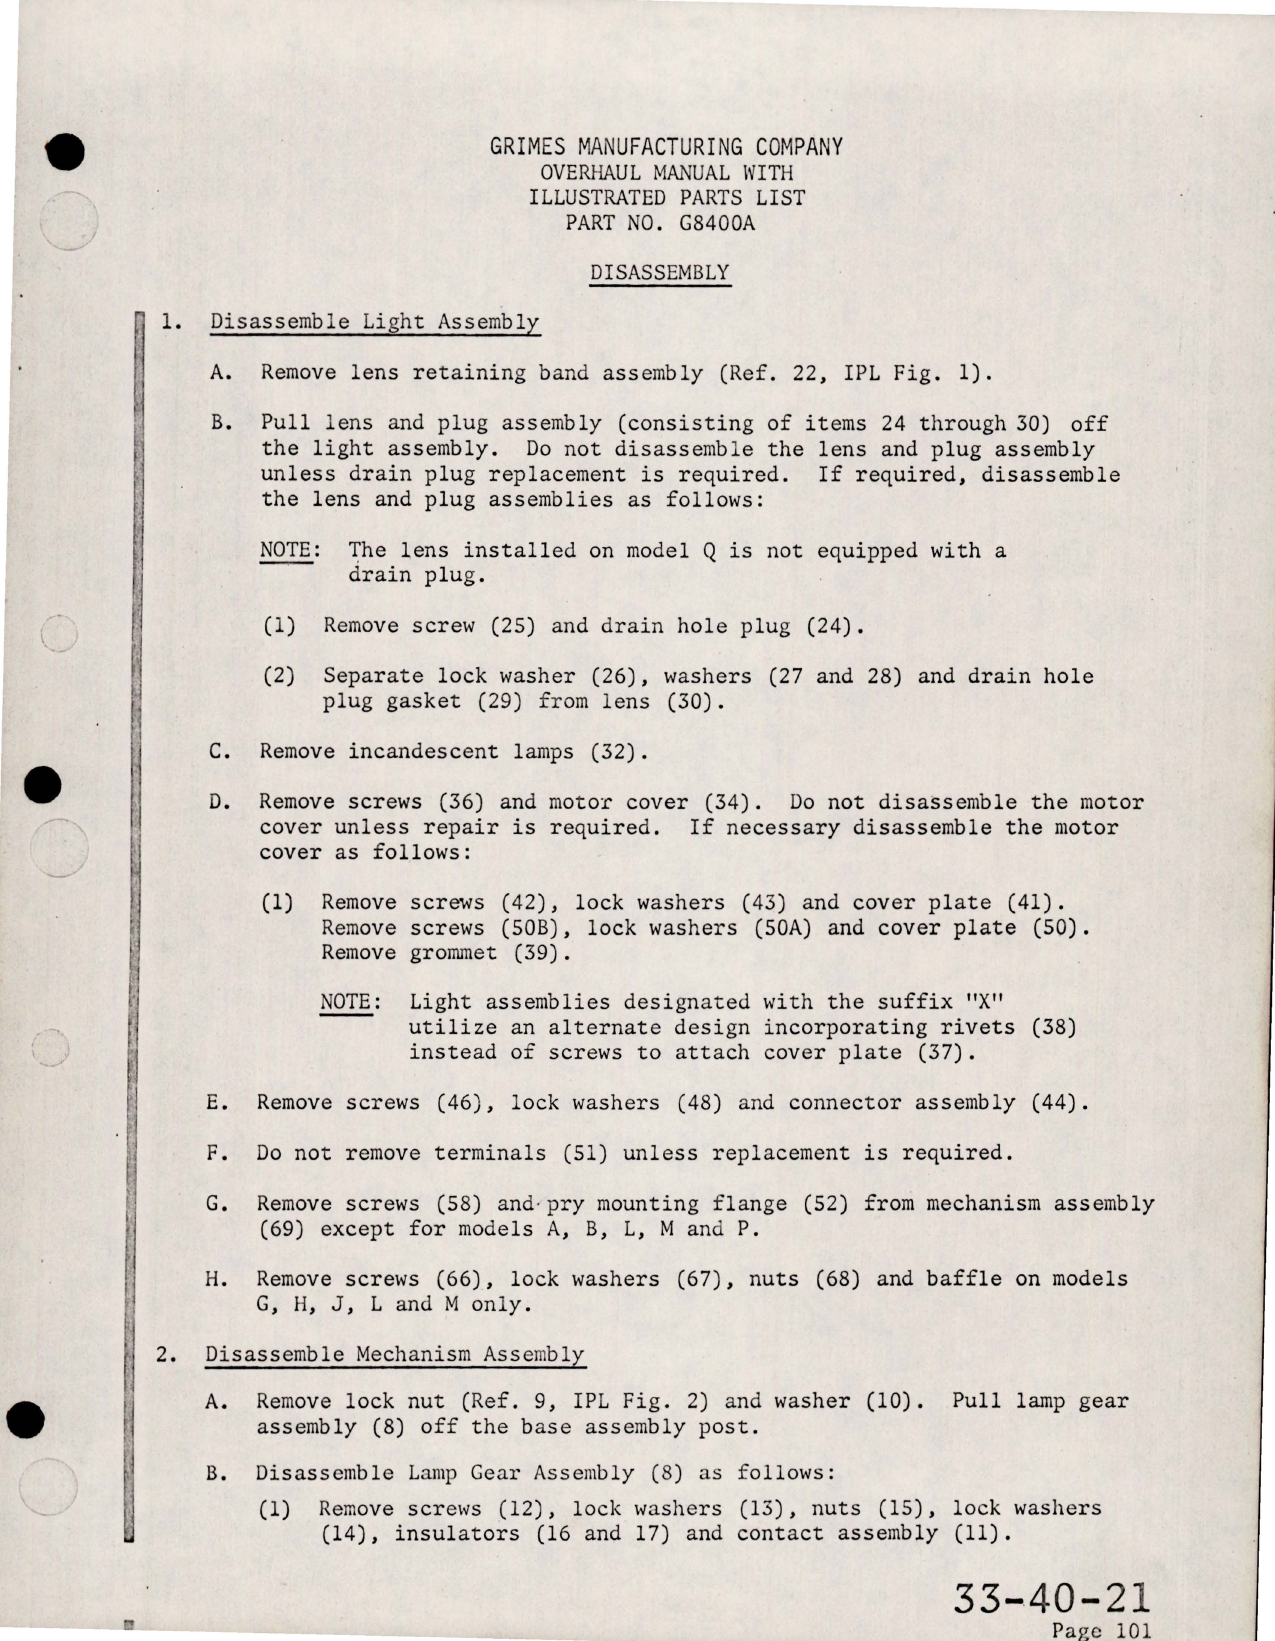 Sample page 9 from AirCorps Library document: Overhaul with Illustrated Parts List for Navigational Rotating Warning Light - G8400A Series